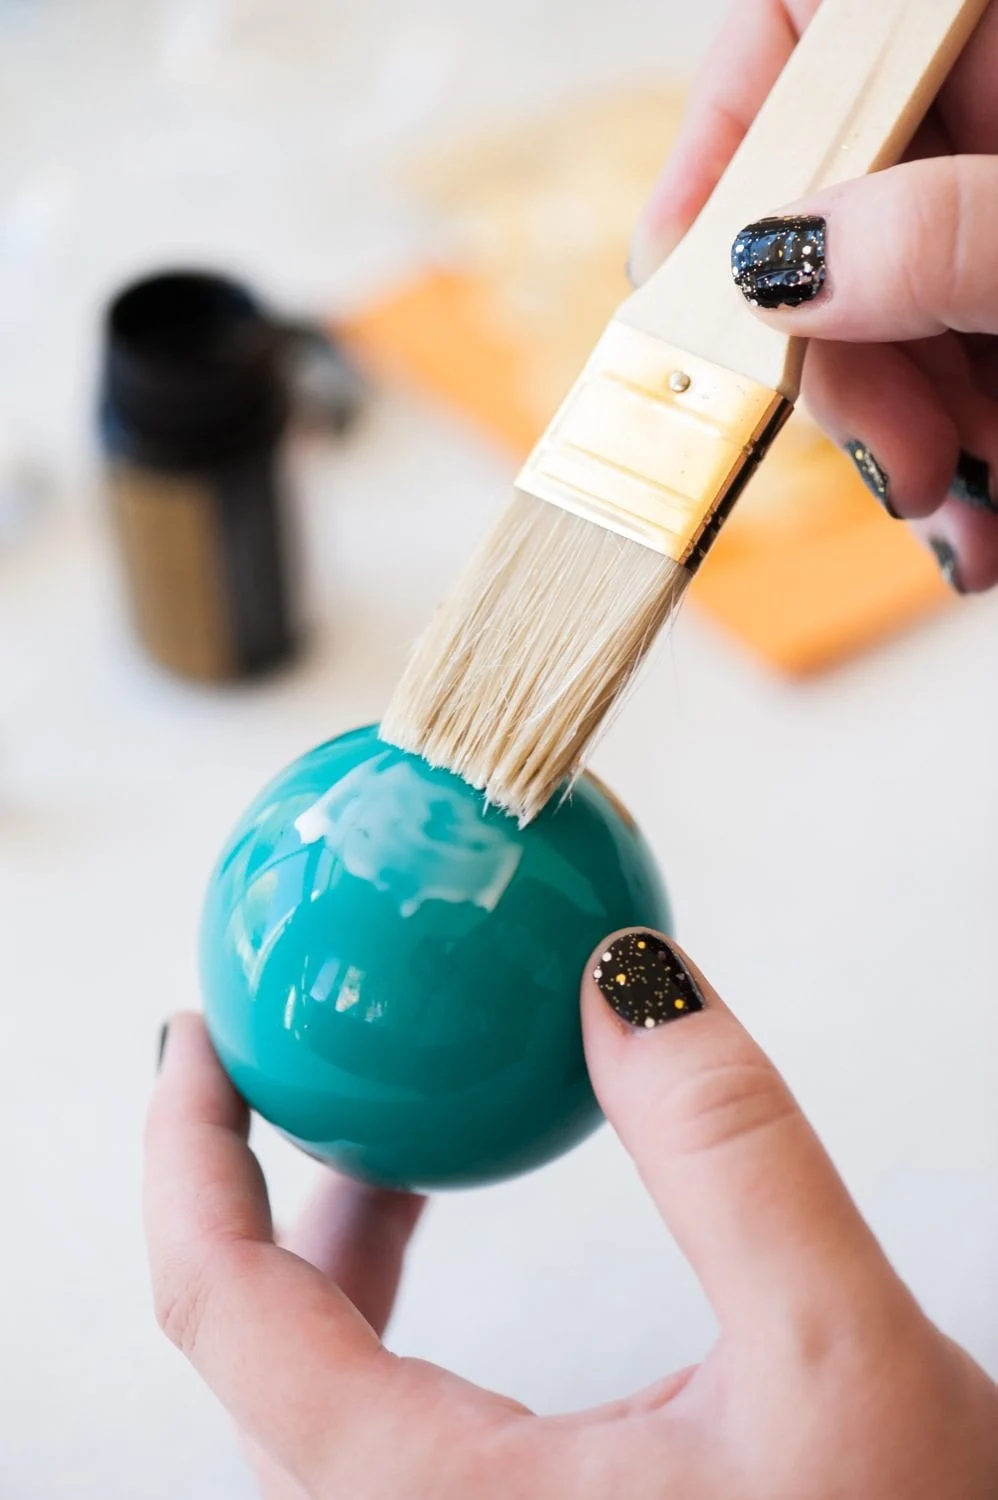 DIY Painted Gold Leaf Ornaments by entertaining blog @cydconverse | How to decorate glass ornaments